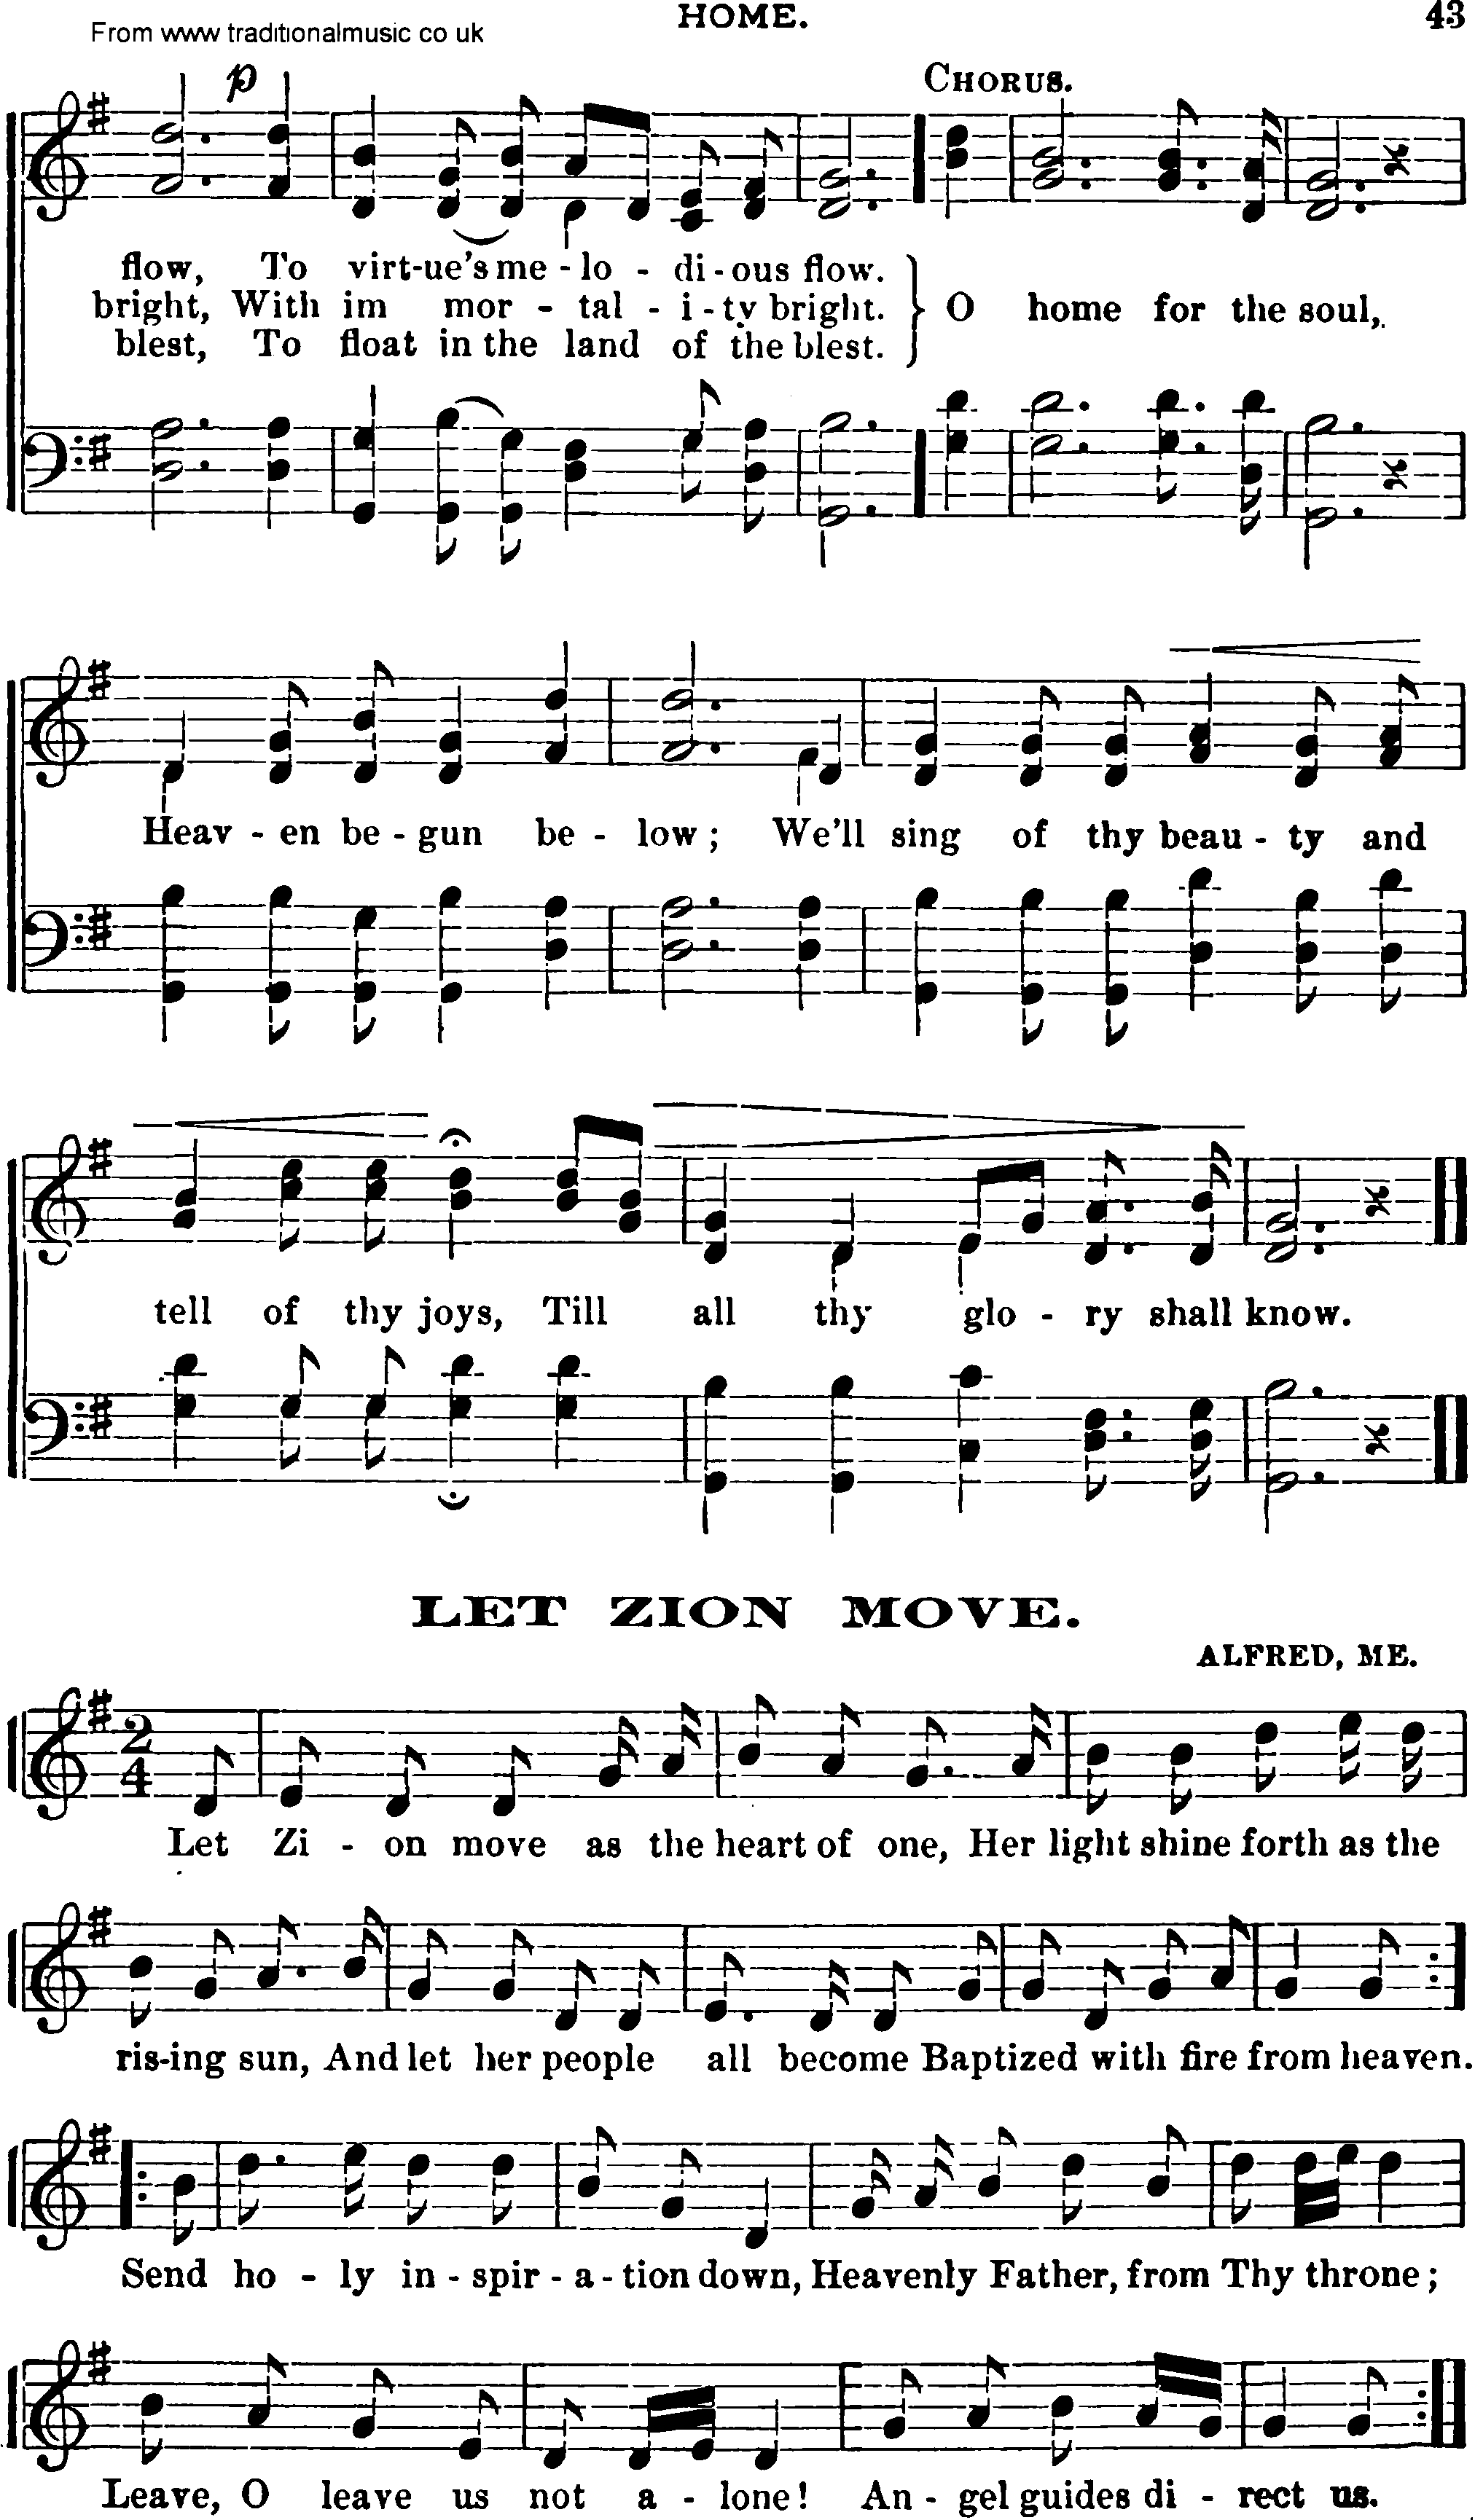 Shaker Music collection, Hymn: Let Zion Move, sheetmusic and PDF